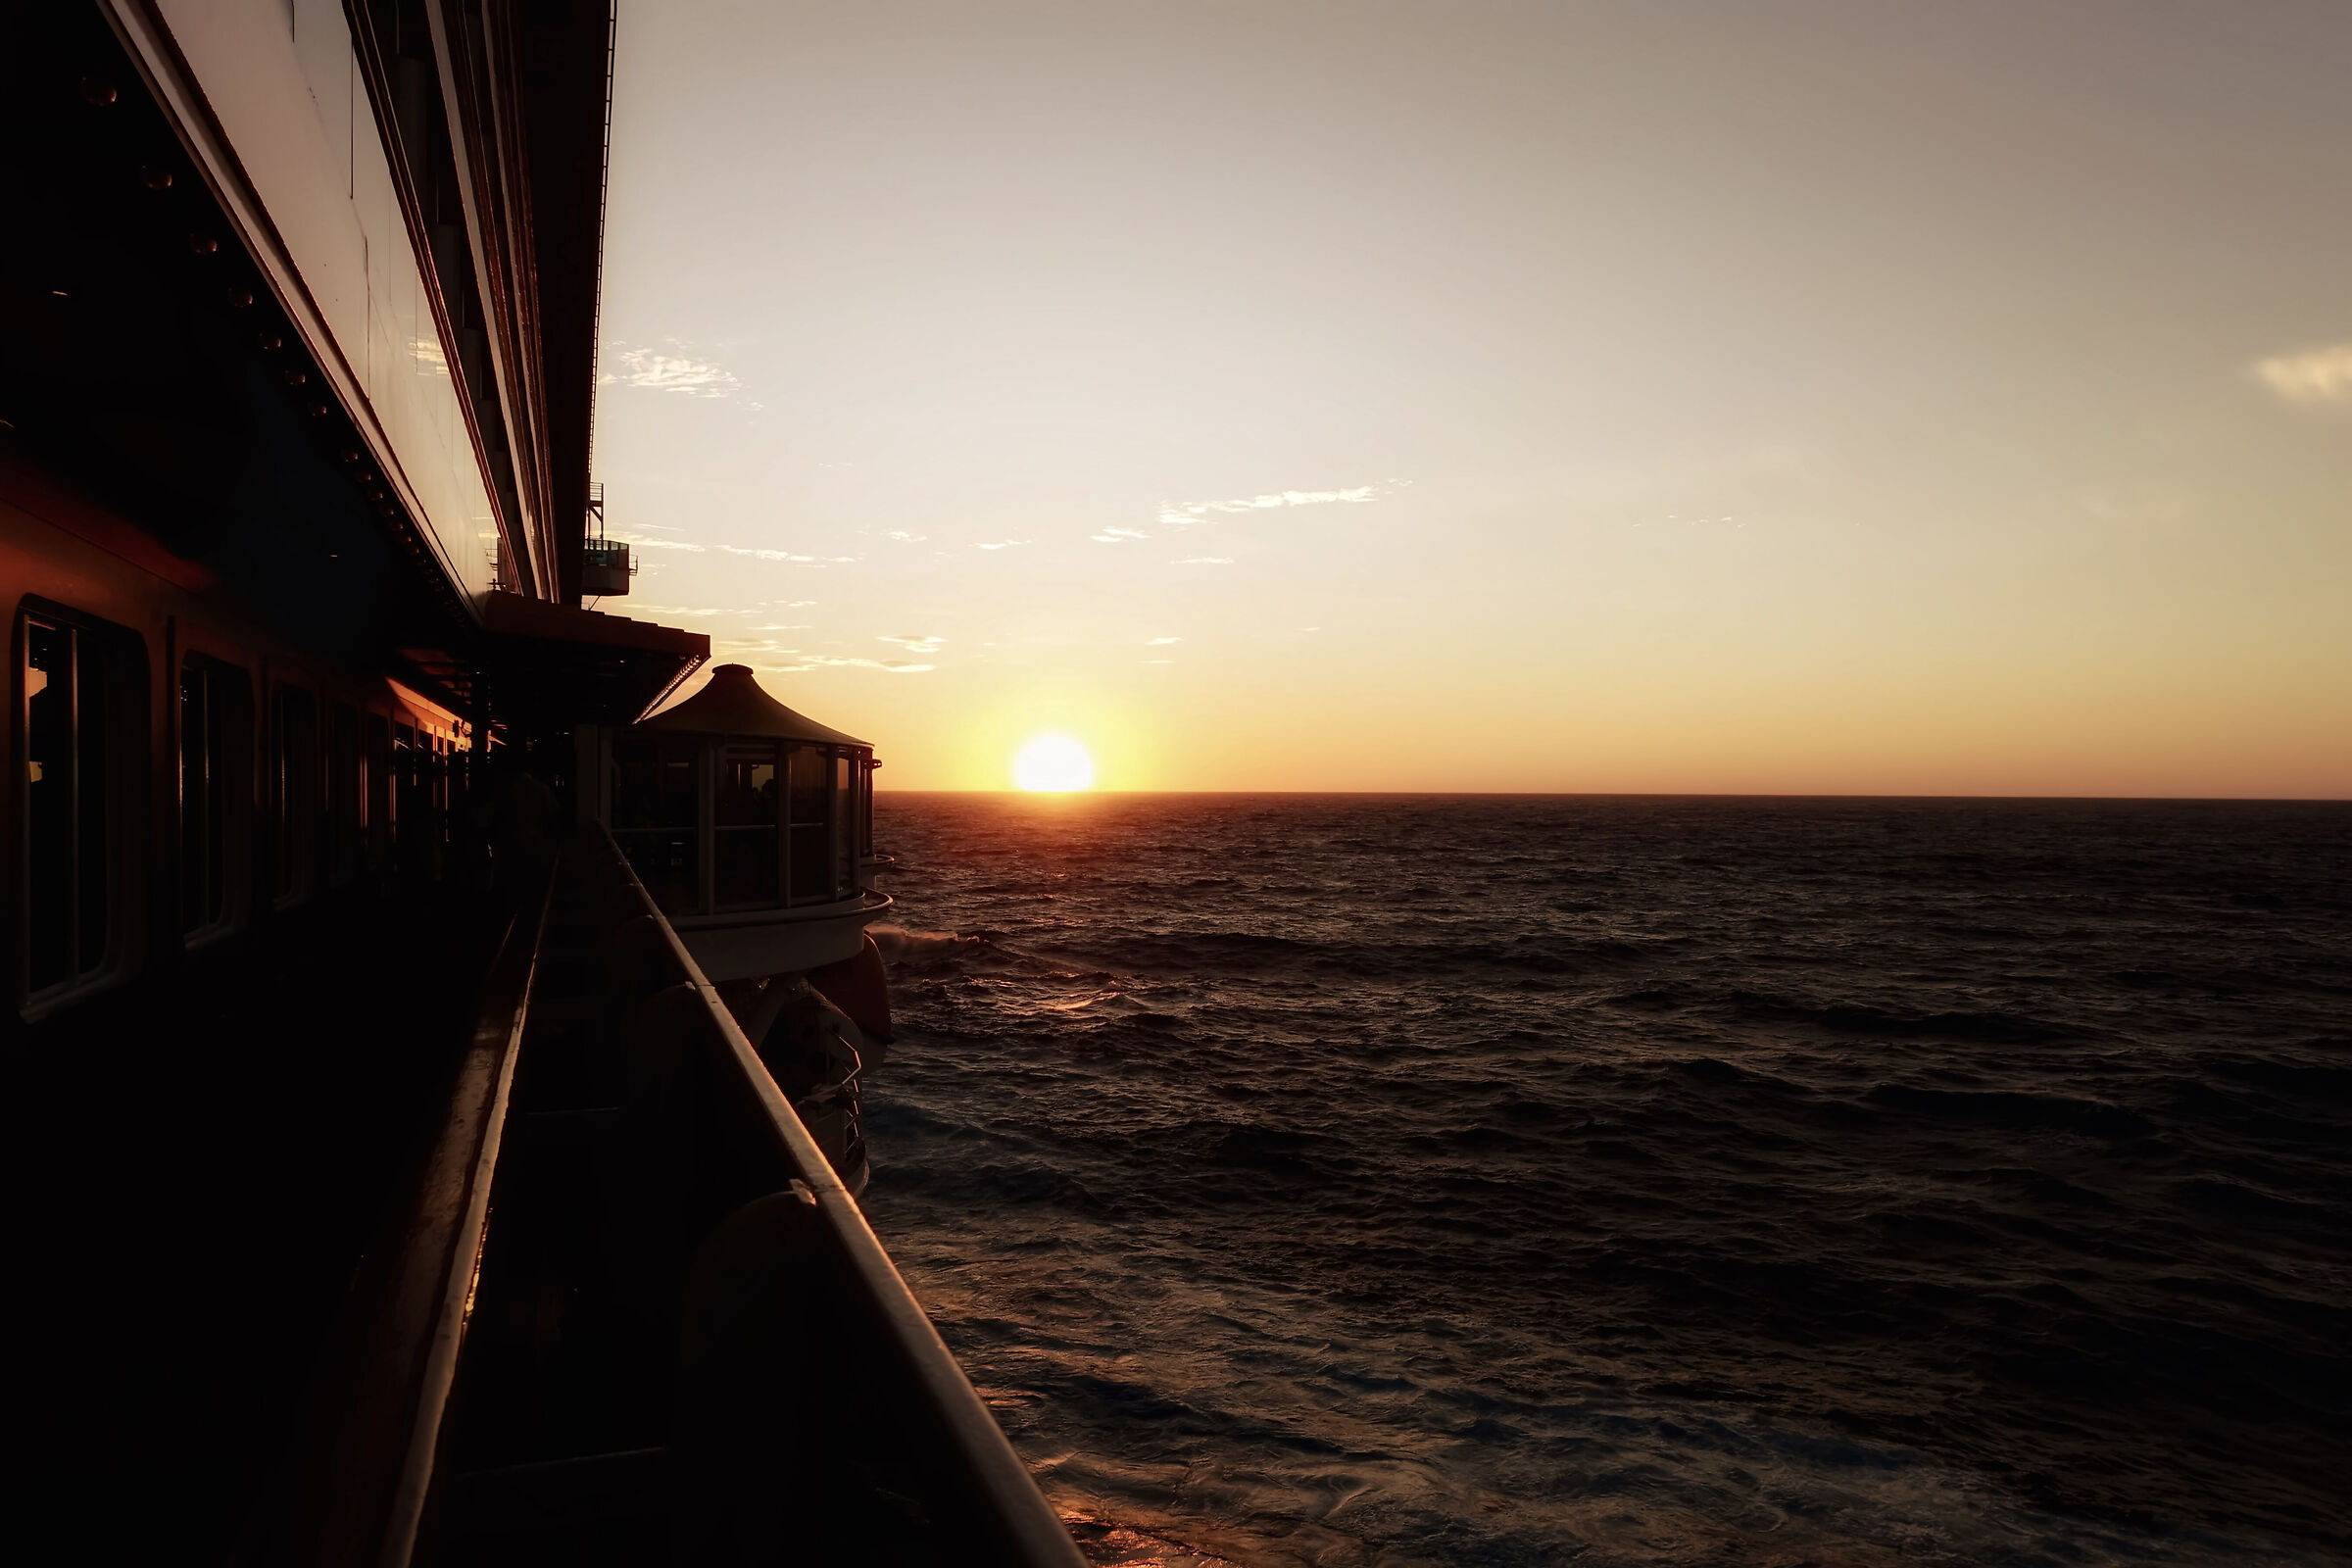 On a cruise, at sunset ...